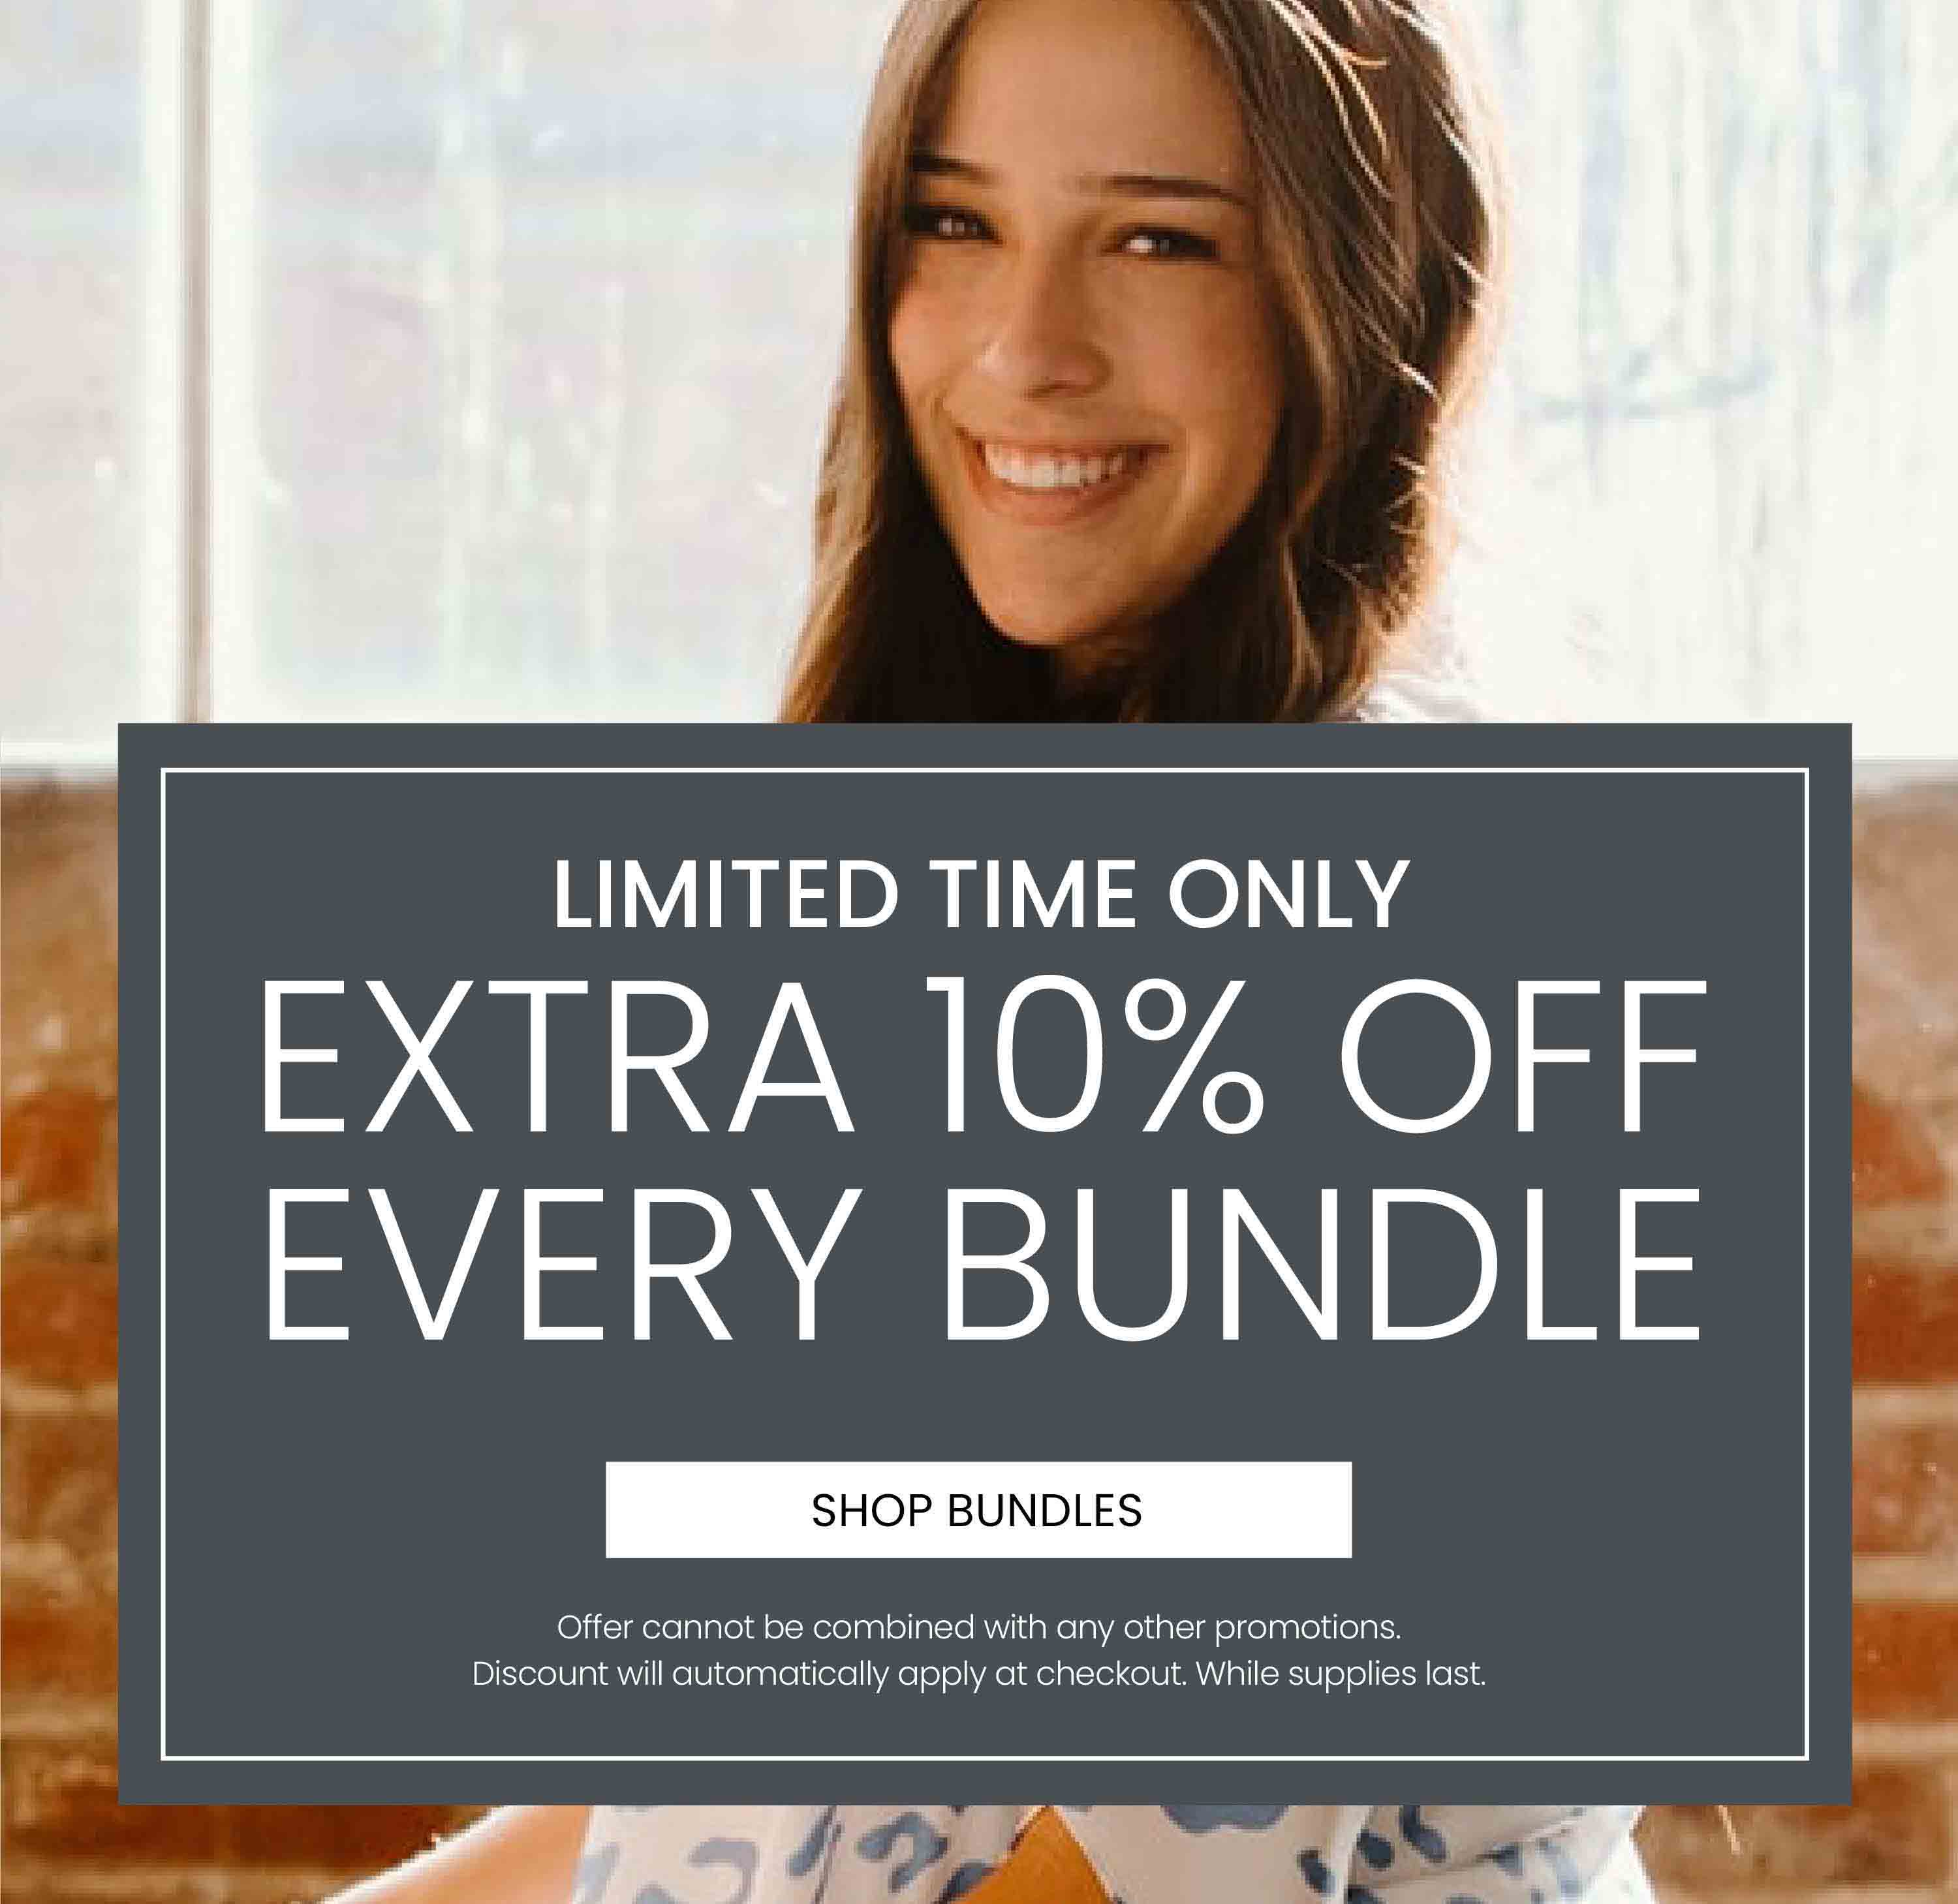 Limited Time Only. Extra 10% Off Every Bundle. Offer cannot be combined with any other promotion. Discount will automatically apply at checkout. While supplies last.